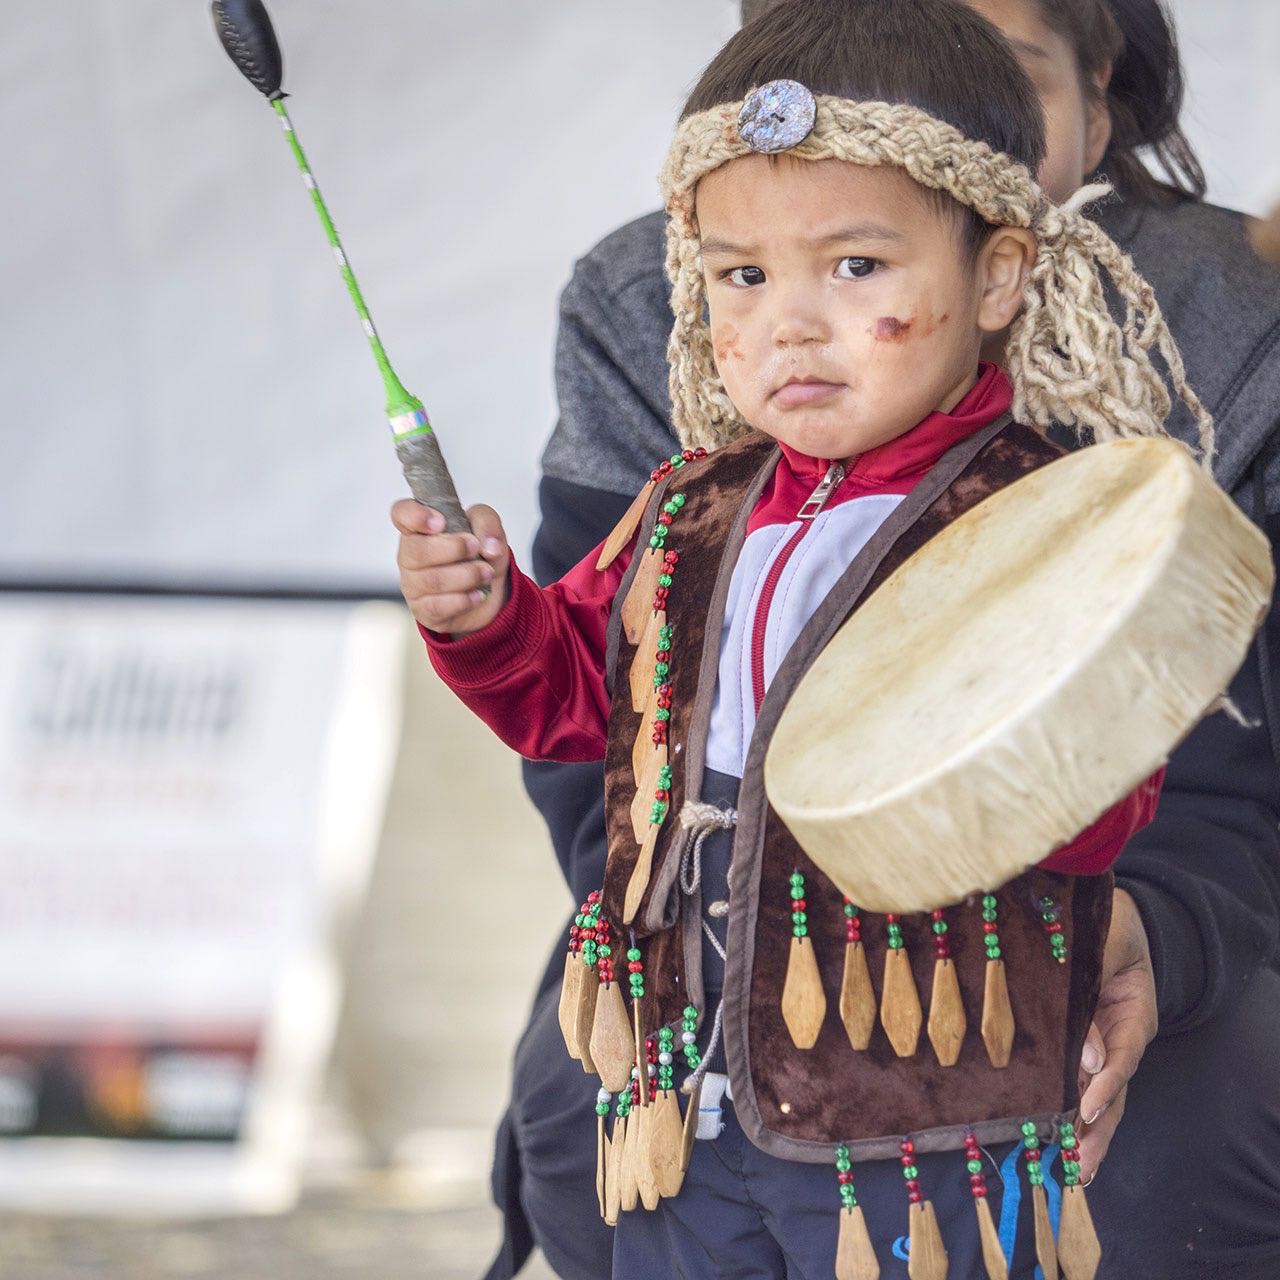 12 images that show how Canada's First Nations culture is being